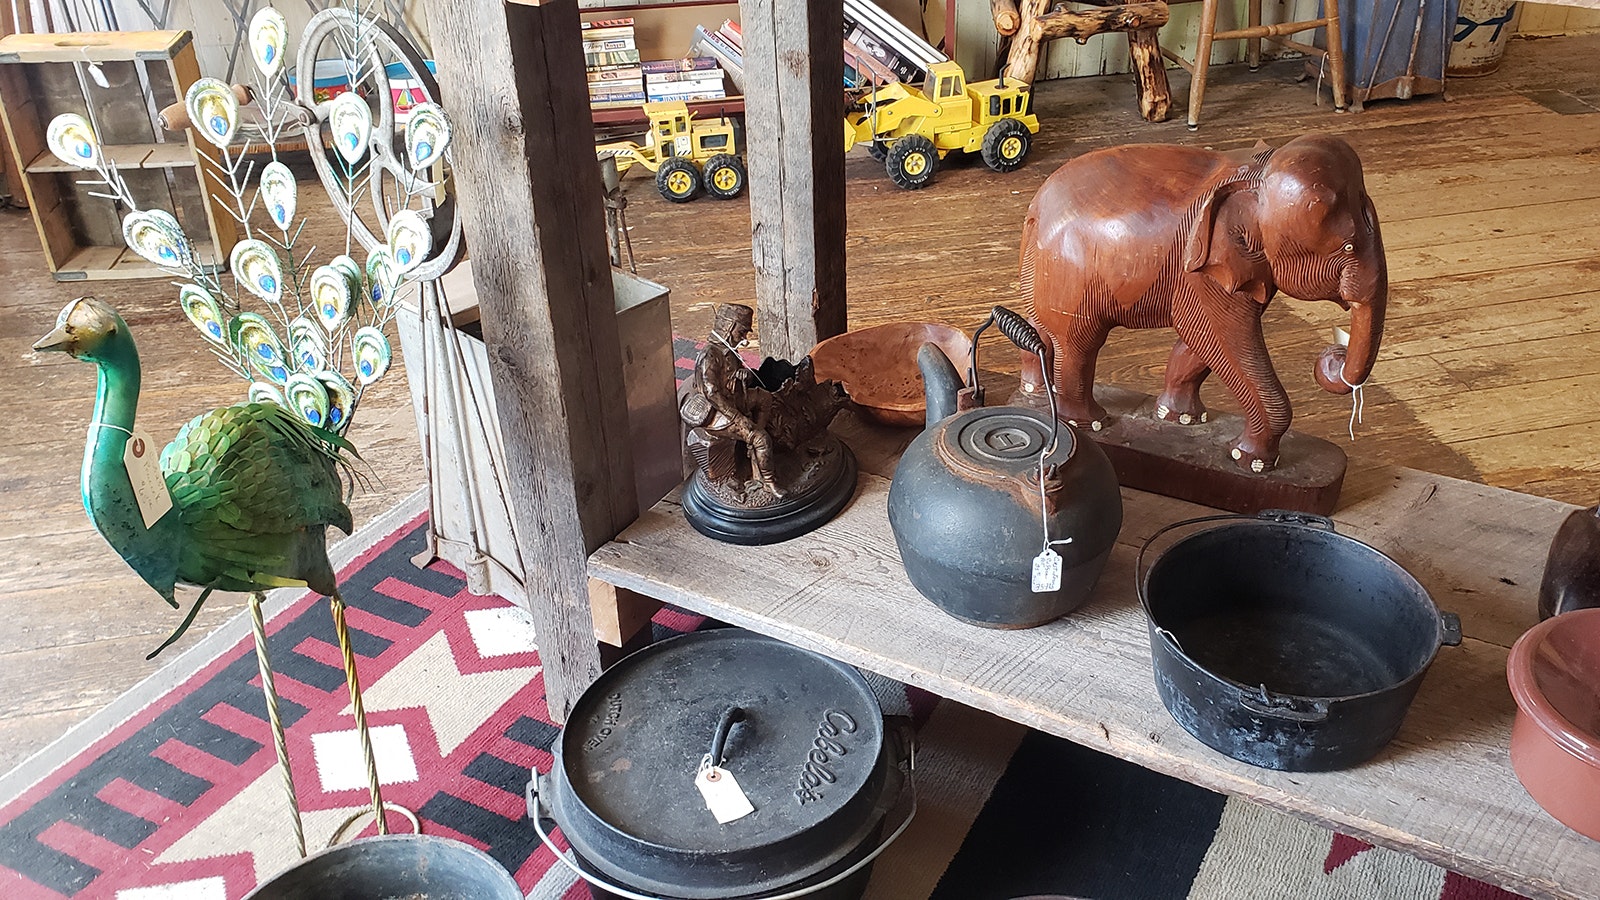 Antique cast iron pans on selves with sculptures and Tonka toys all contribute to the museum-esque feel of the Aladdin General Store. But unlike a museum, all the items are for sale.